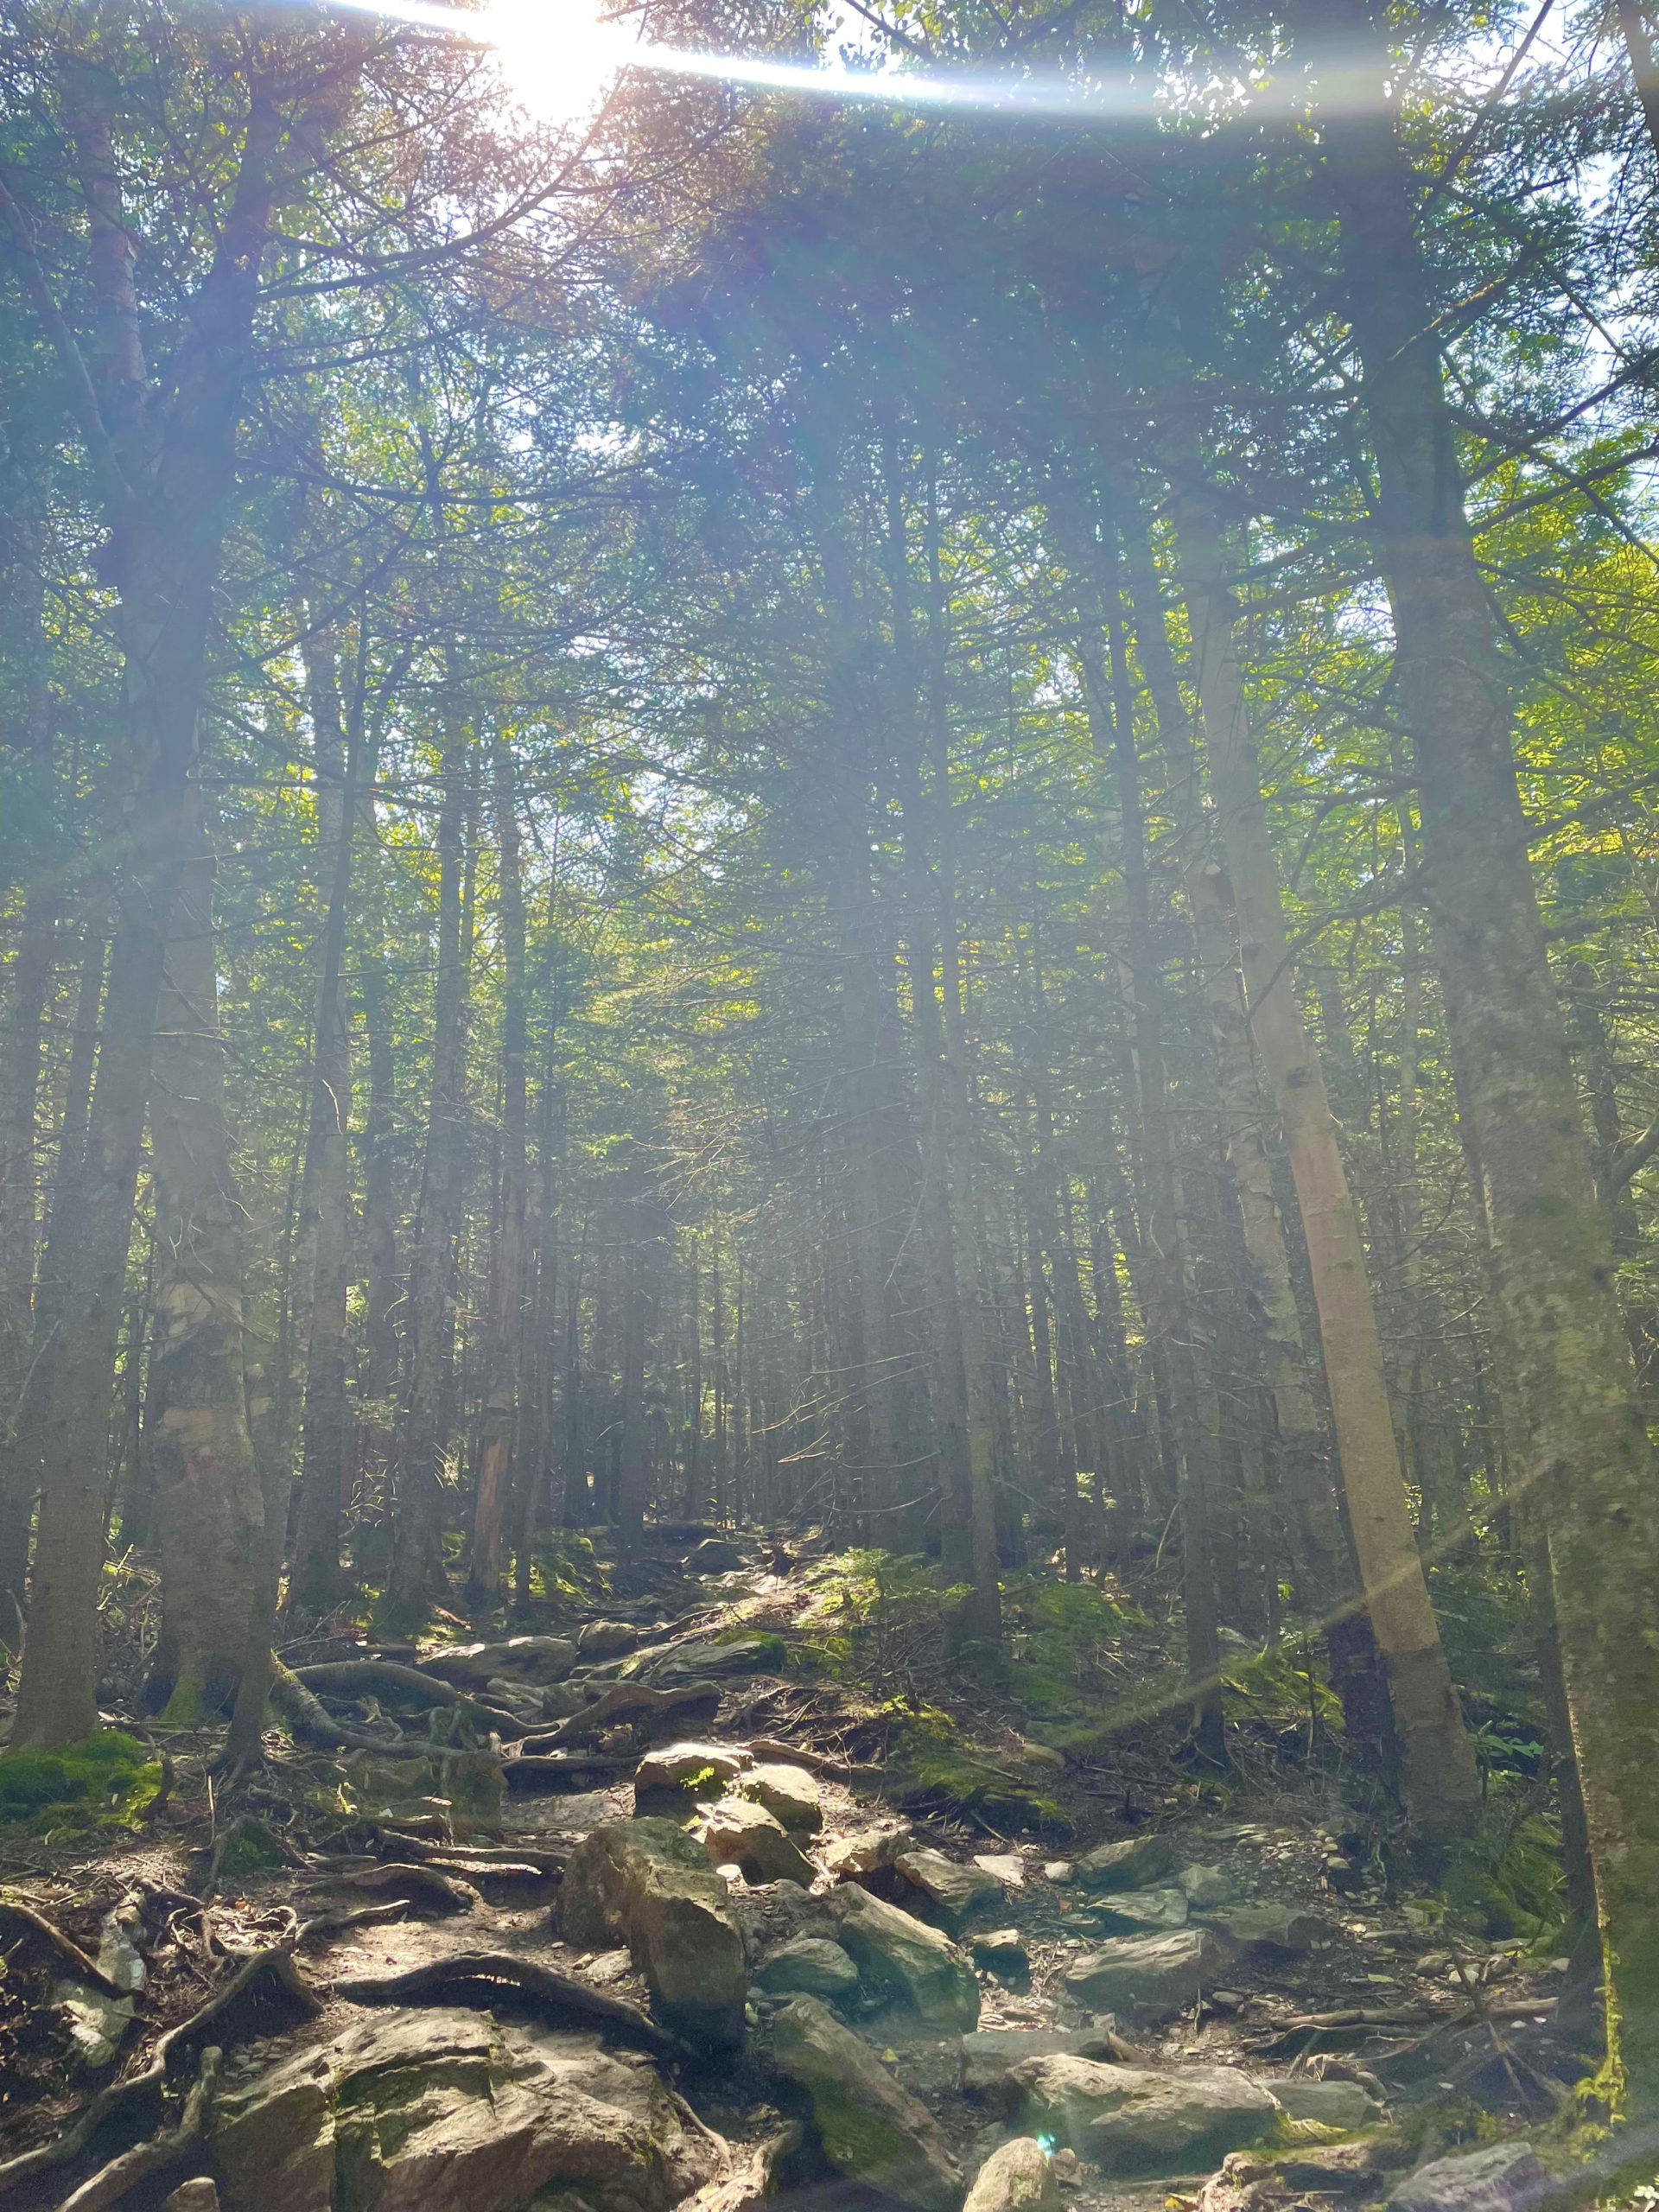 Sun over the trail, seen while hiking Camel's Hump in the Green Mountains, Vermont